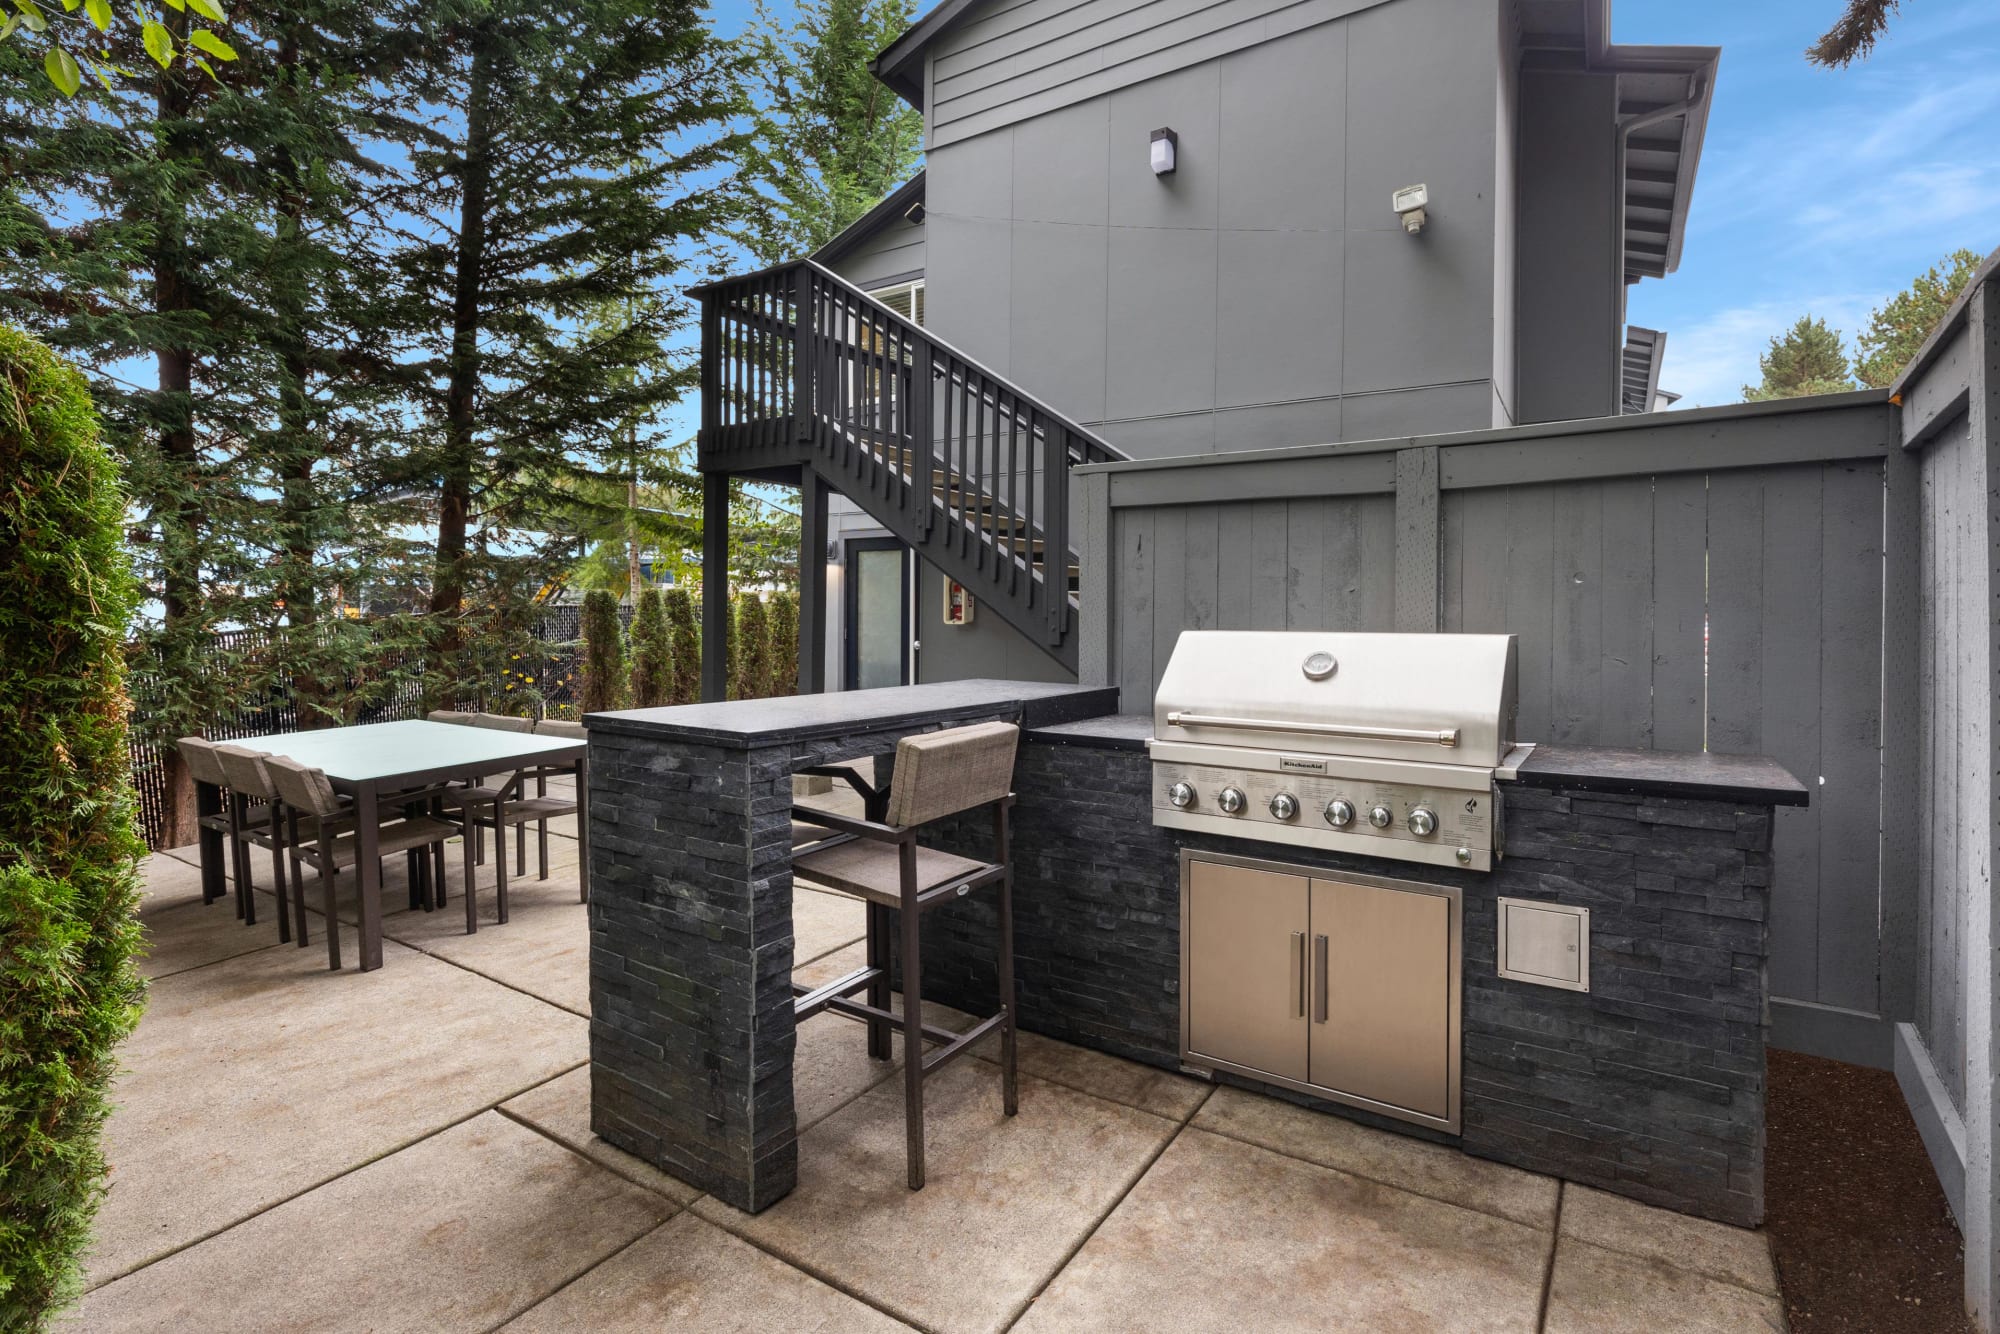 Outdoor BBQ area at Karbon Apartments in Newcastle, Washington